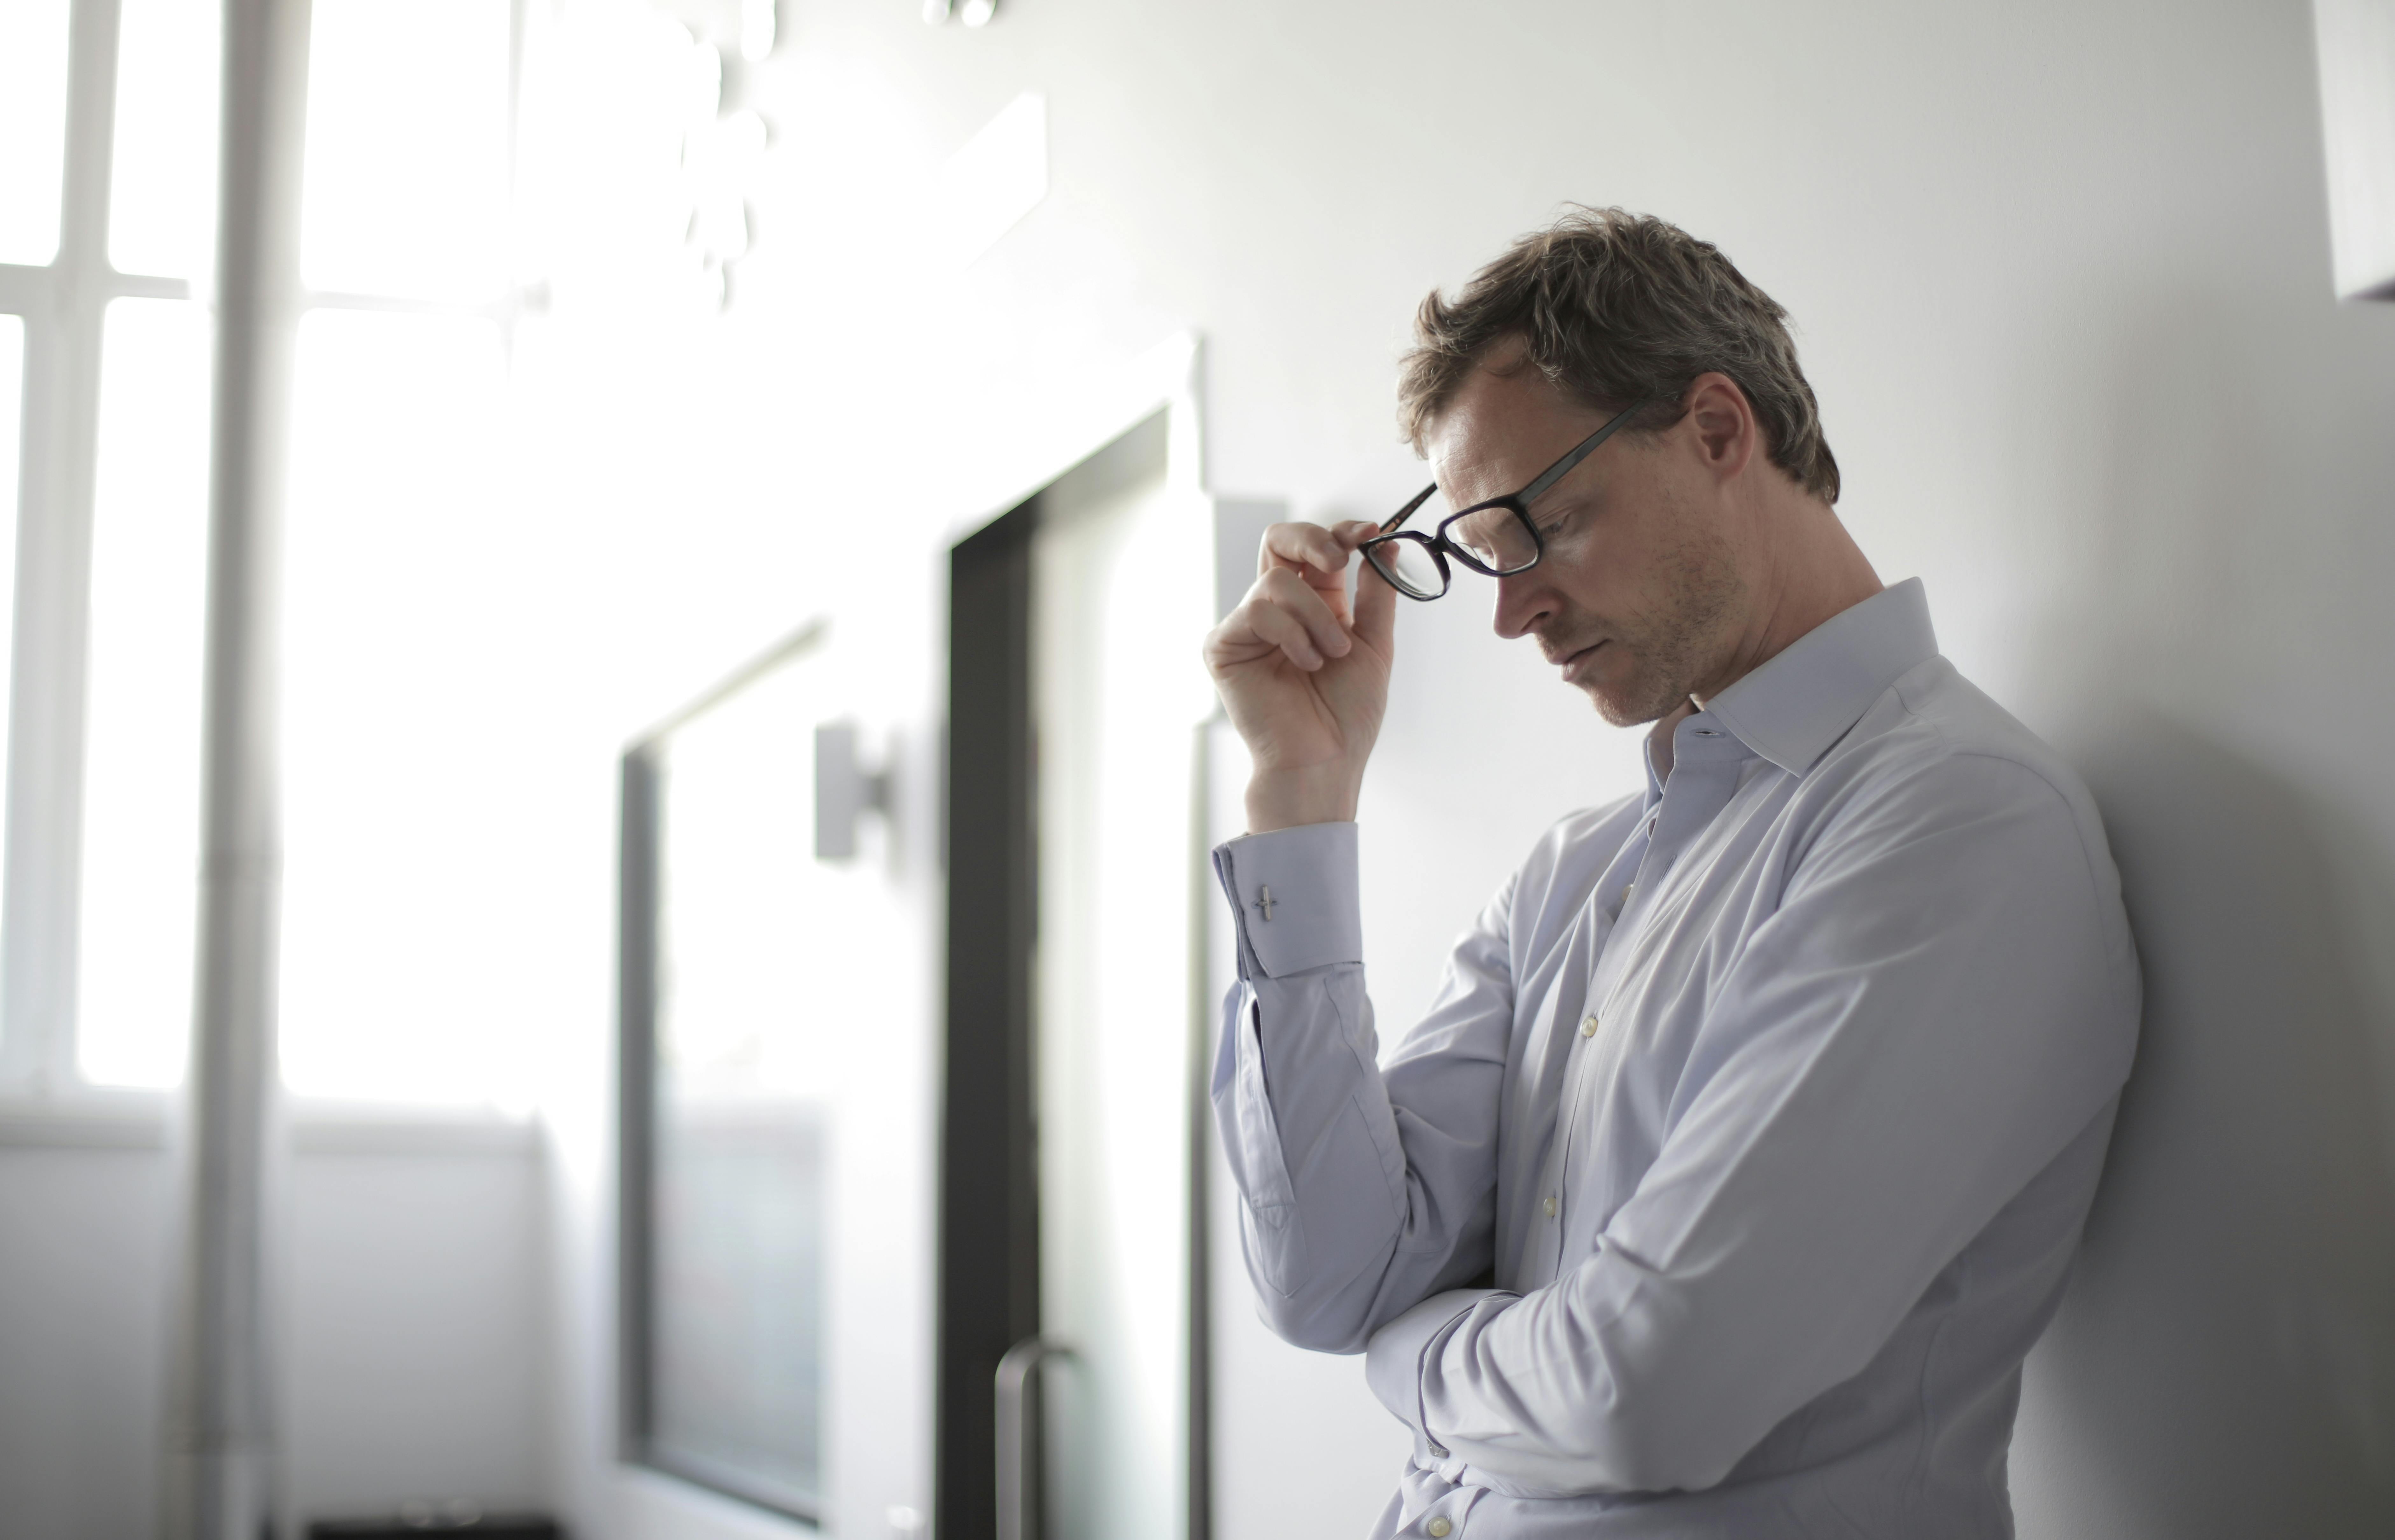 An upset man leaning against a wall and removing his glasses | Source: Pexels